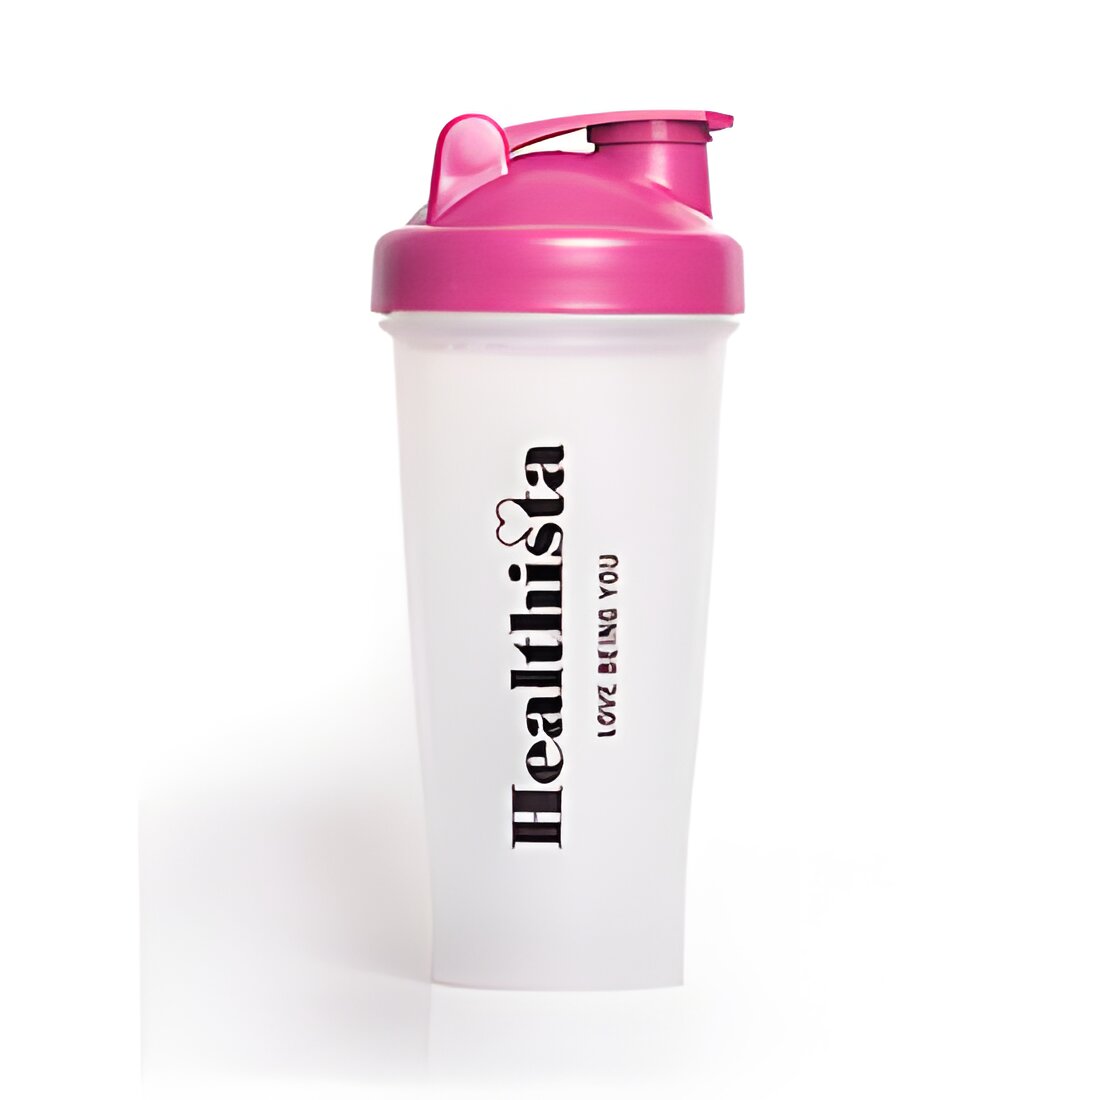 Free Protein Powder Sample And Shaker